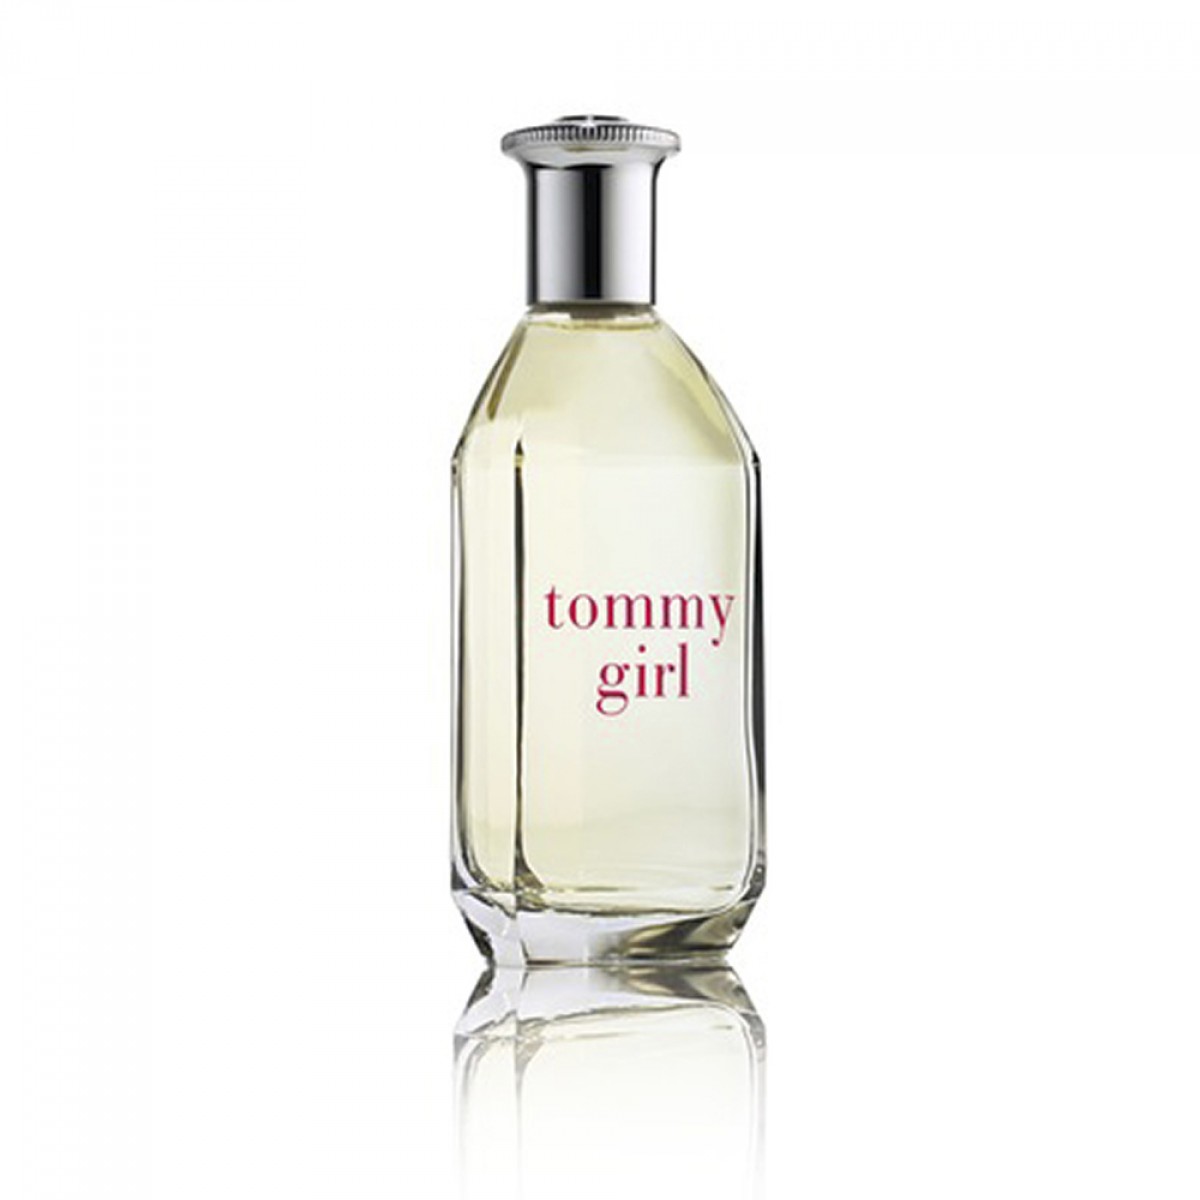 tommy 10 cologne Online shopping has 